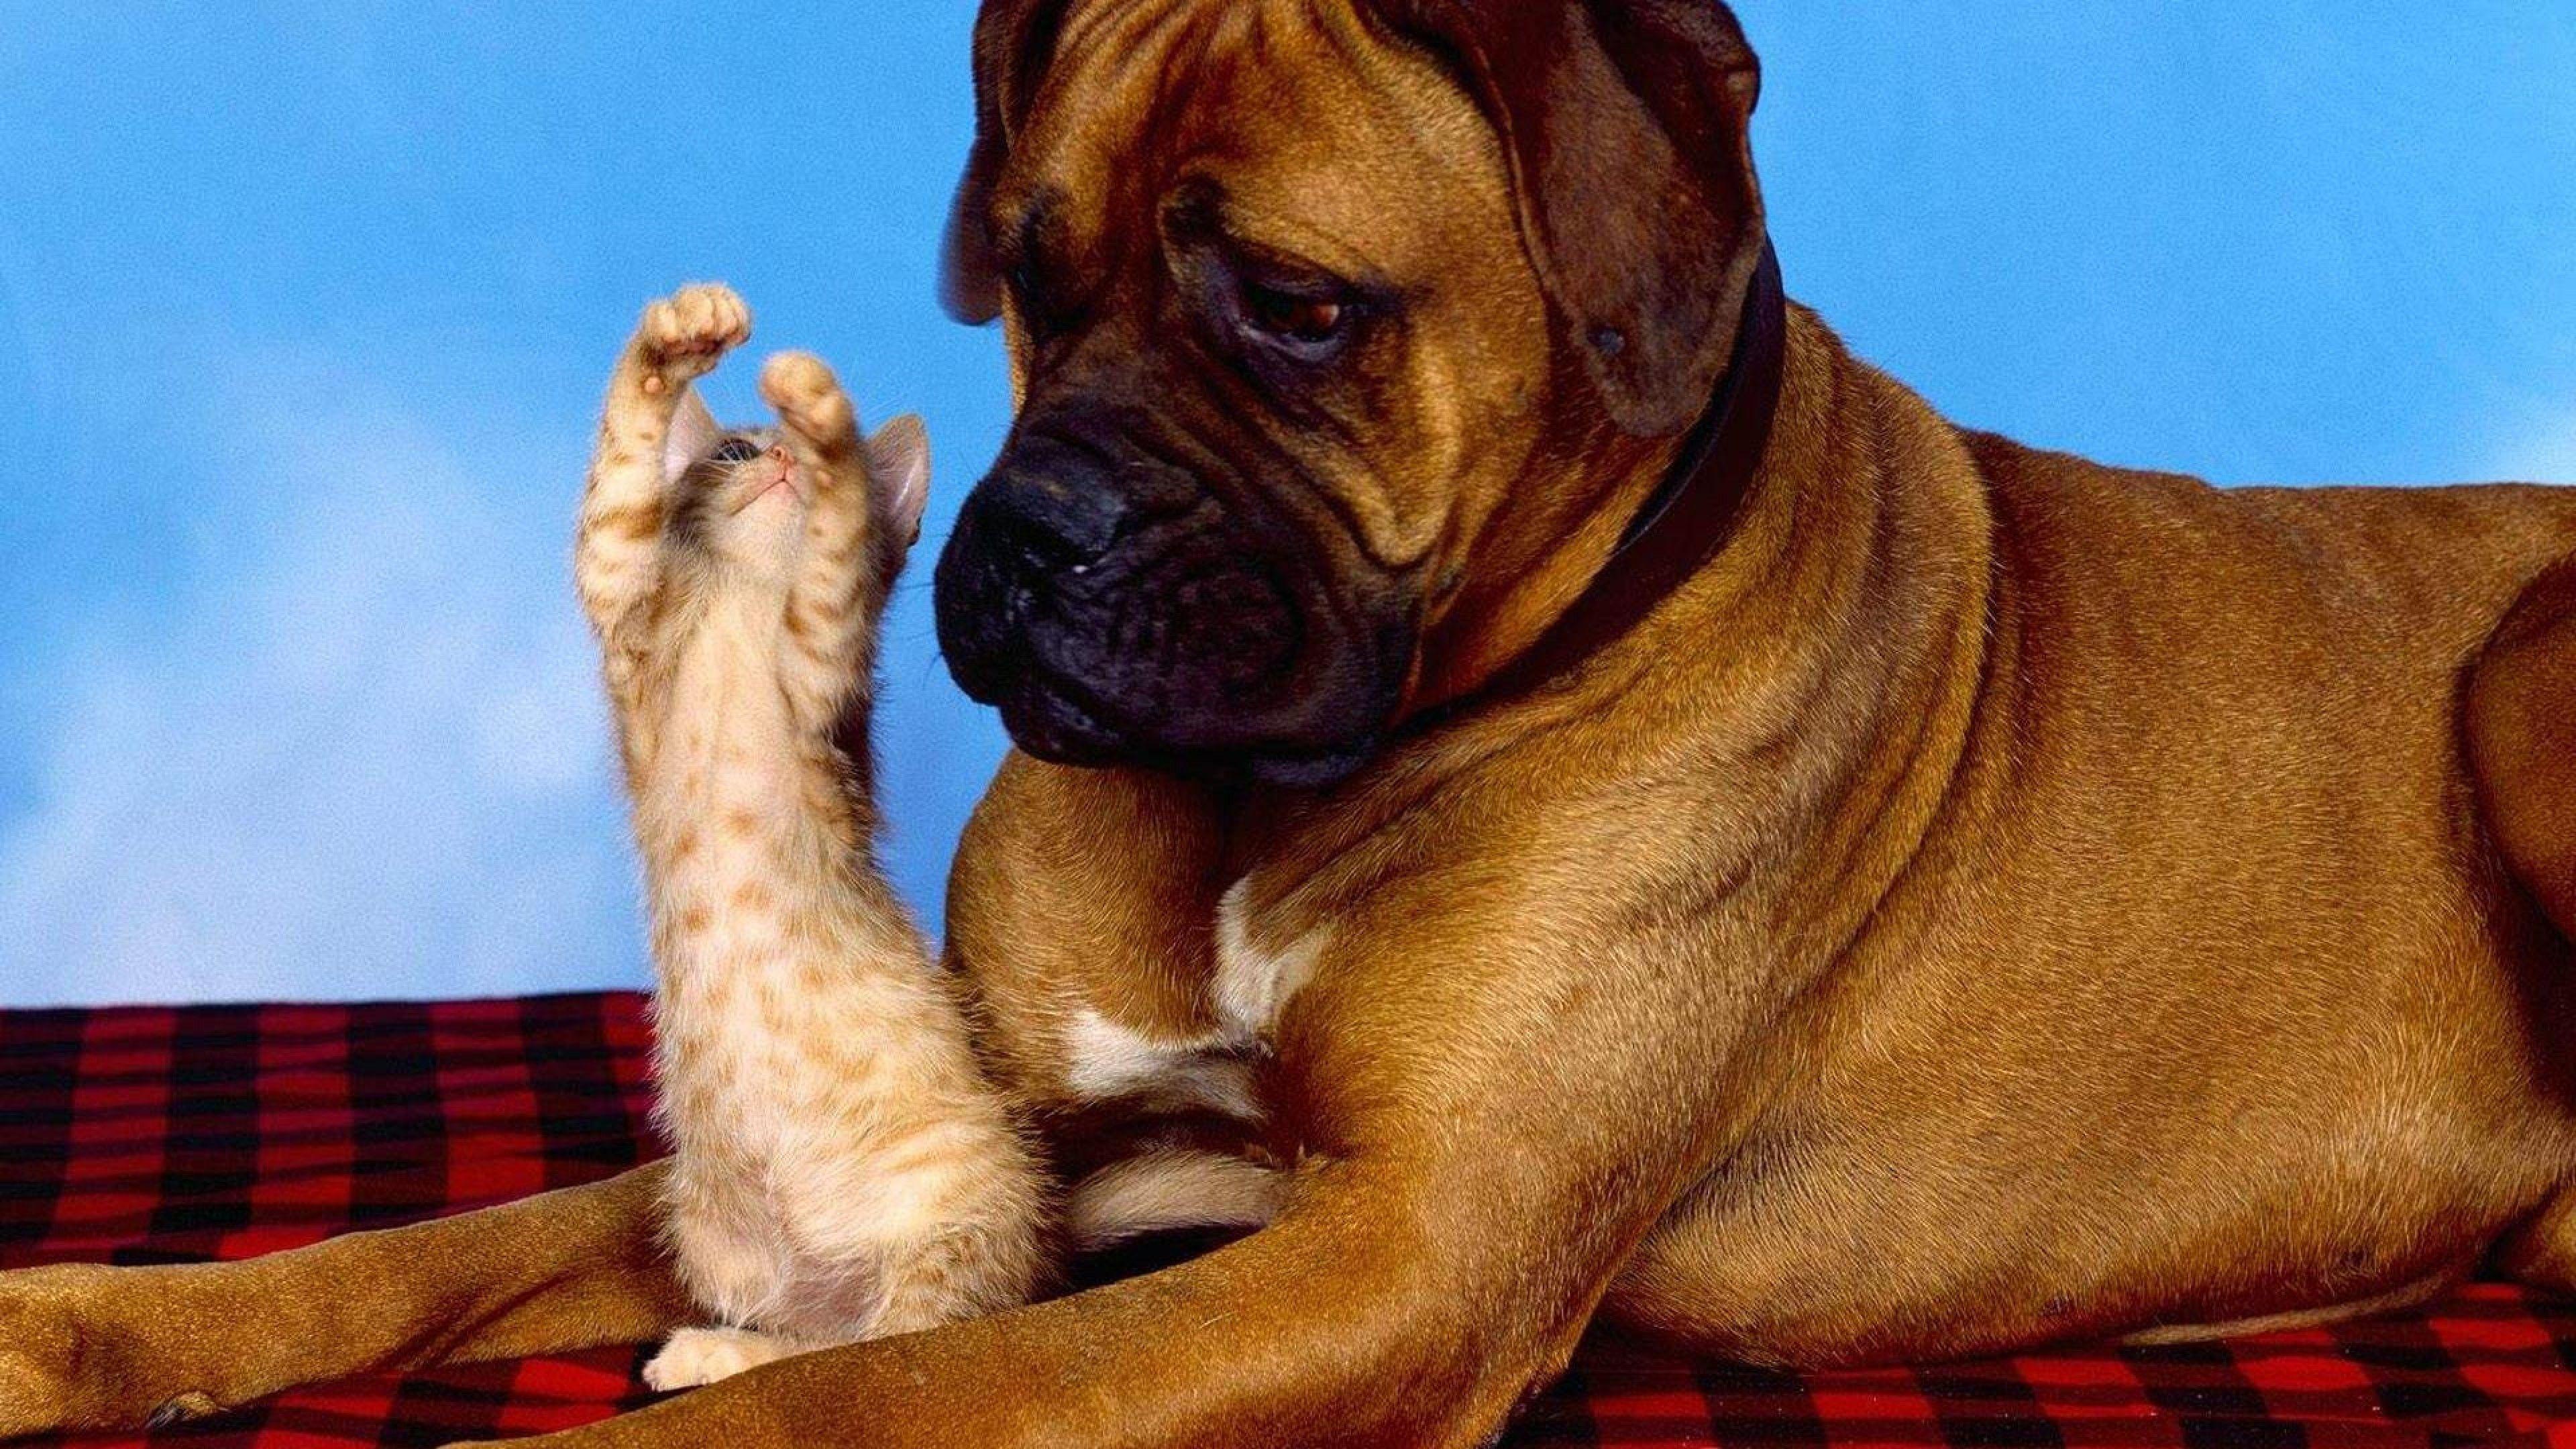 Cat and Dog Funny Wallpapers - Top Free Cat and Dog Funny Backgrounds